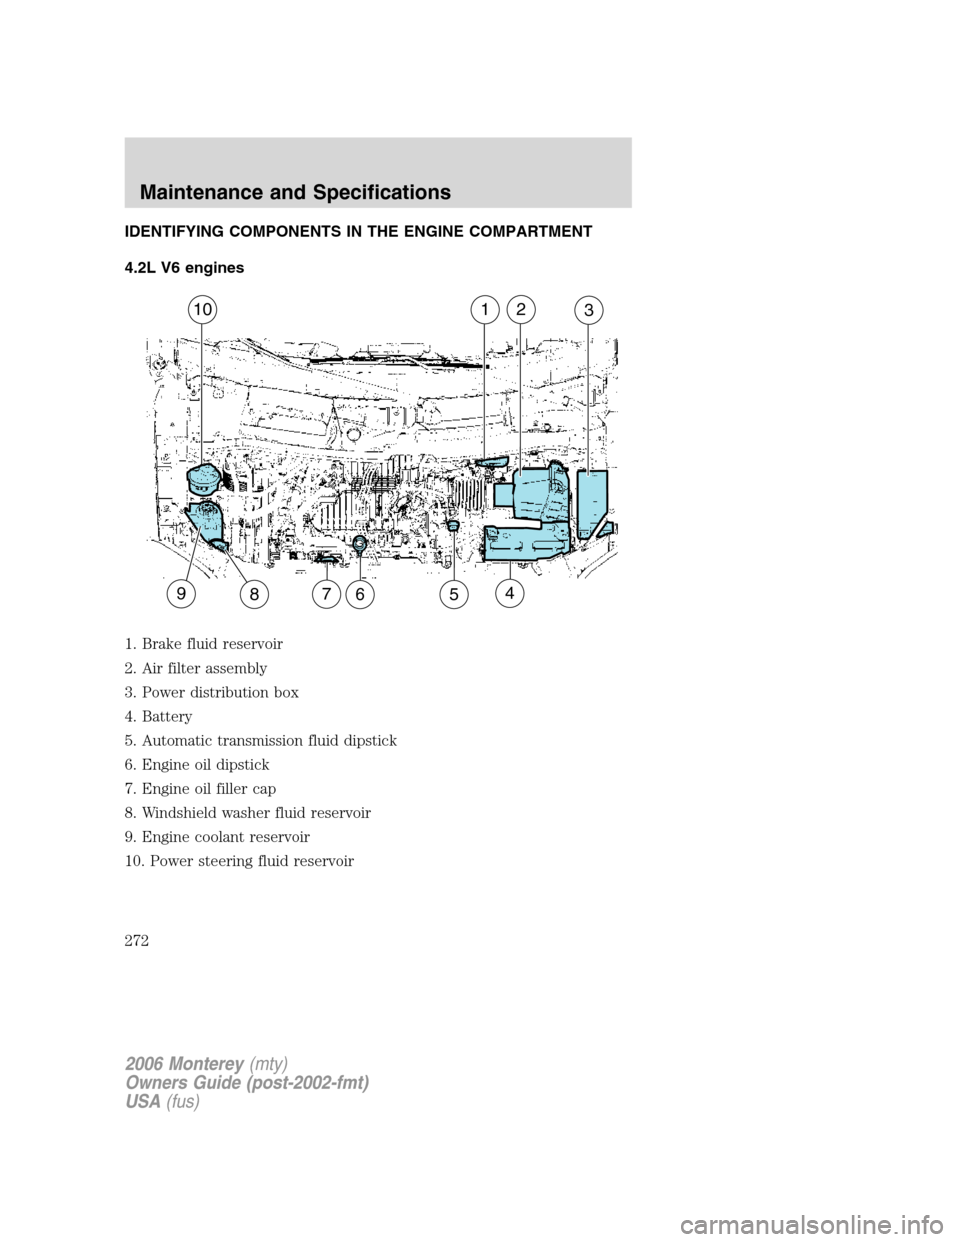 Mercury Monterey 2006  Owners Manuals IDENTIFYING COMPONENTS IN THE ENGINE COMPARTMENT
4.2L V6 engines
1. Brake fluid reservoir
2. Air filter assembly
3. Power distribution box
4. Battery
5. Automatic transmission fluid dipstick
6. Engine